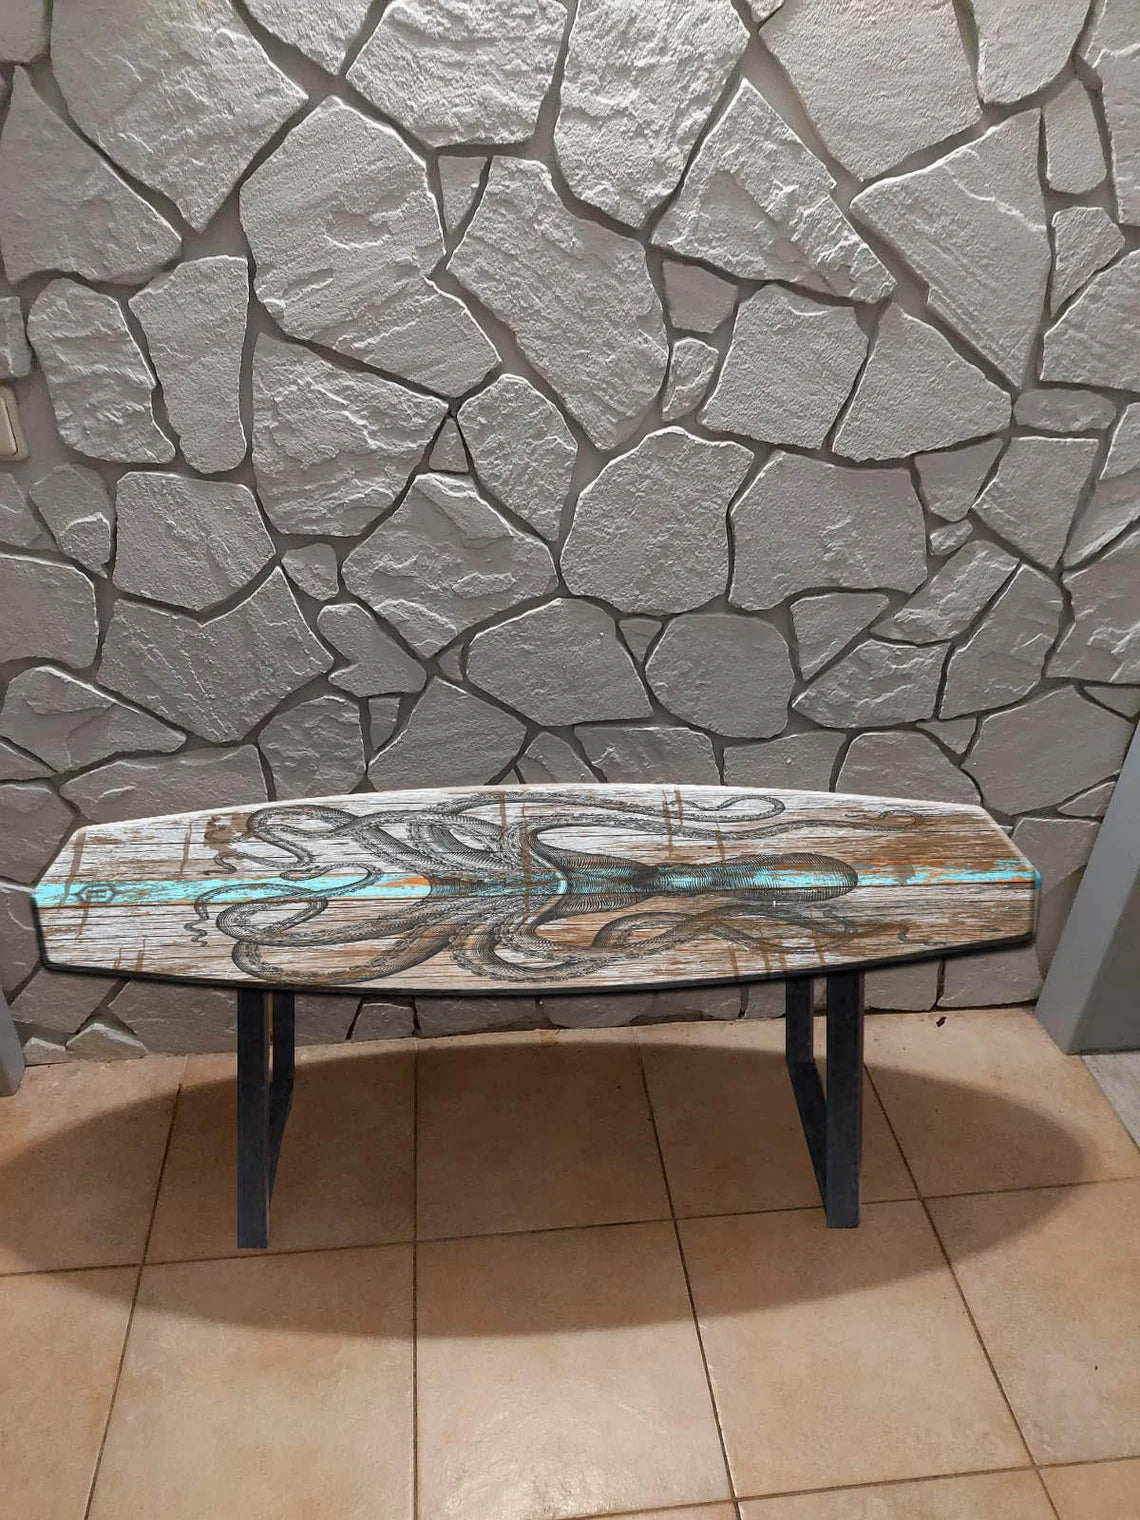 Surf-Inspired Handmade Wooden Bench with Massive Metal Legs and Squid Pattern